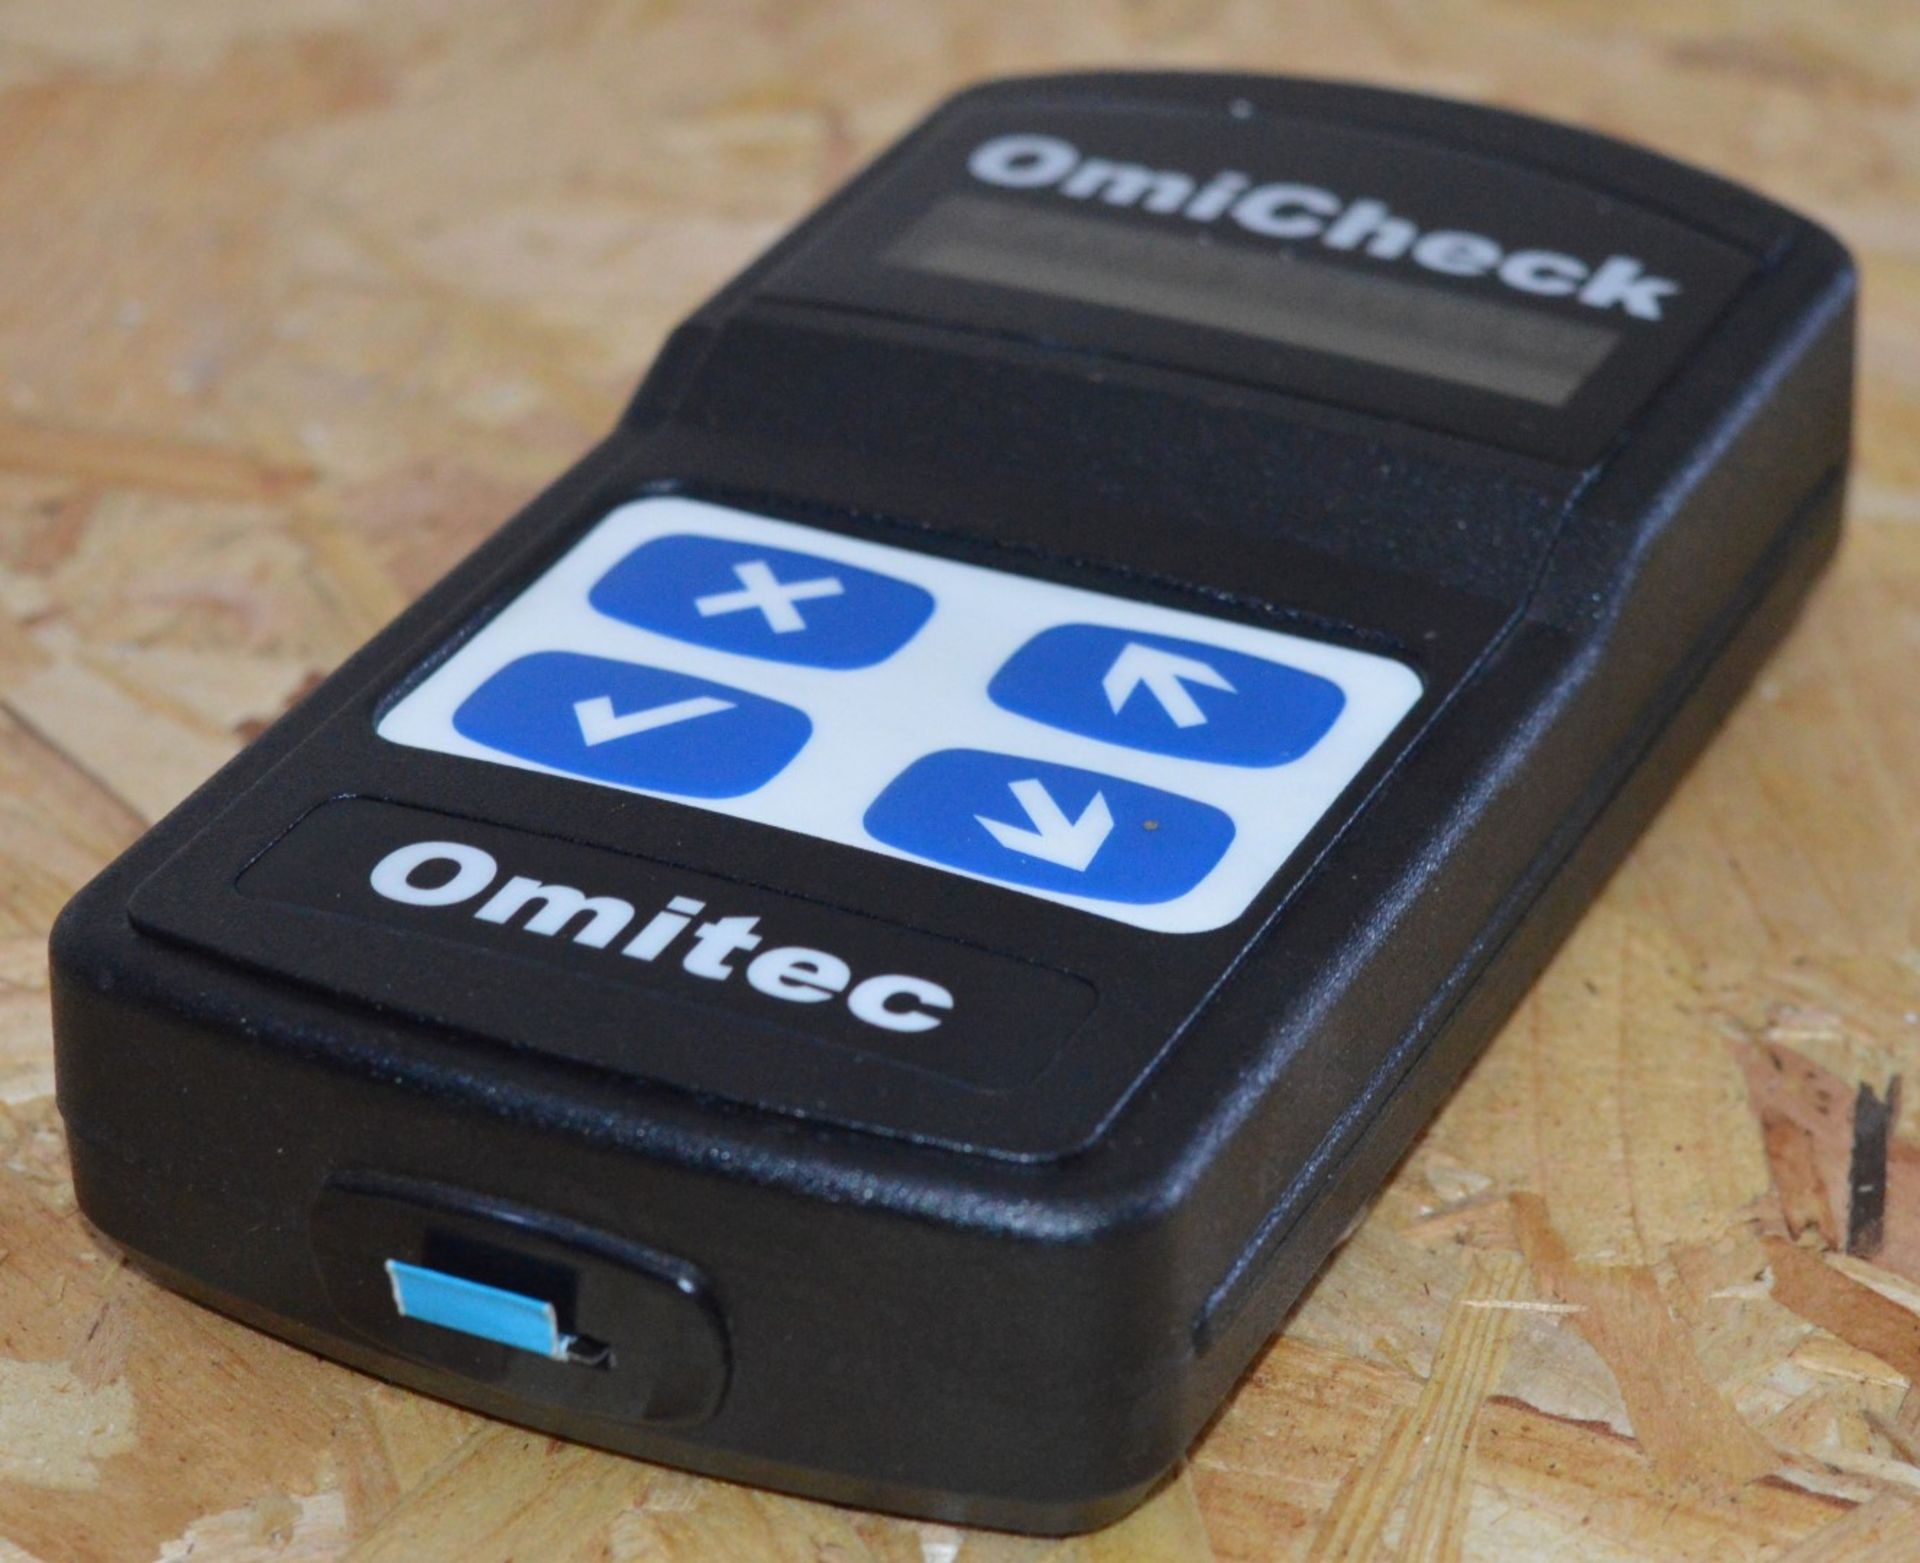 1 x Omitec OmiCheck Automotive Diagnostic Tool - Model OM97B - Good Condition - CL011 - Ref - Image 4 of 5